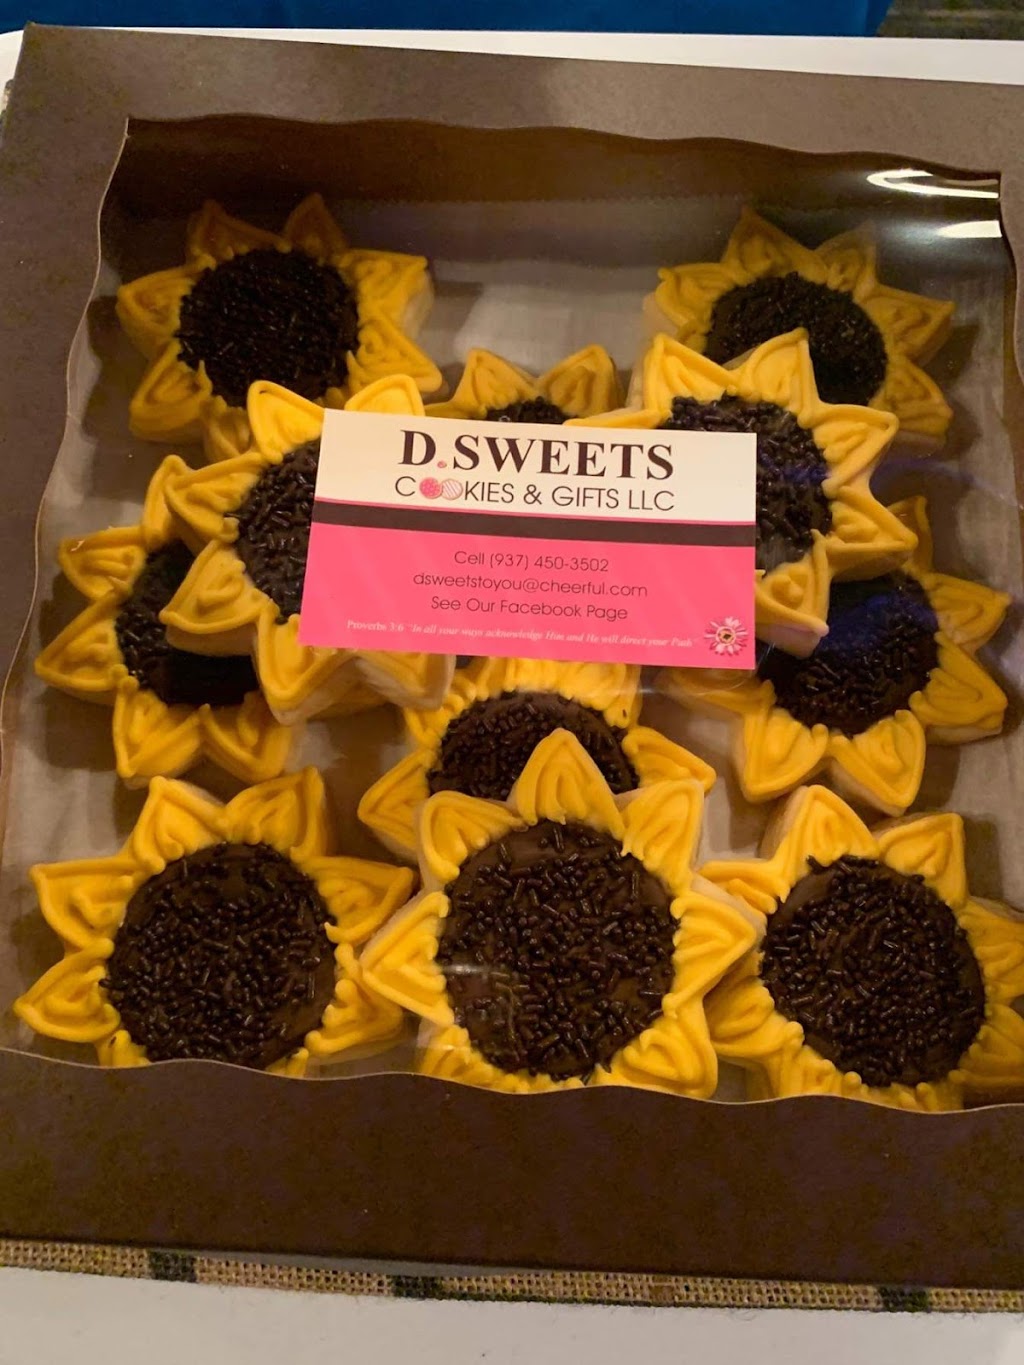 D. Sweets, Cookies & Gifts, LLC | 1605 E Main St, Springfield, OH 45503 | Phone: (937) 450-3502